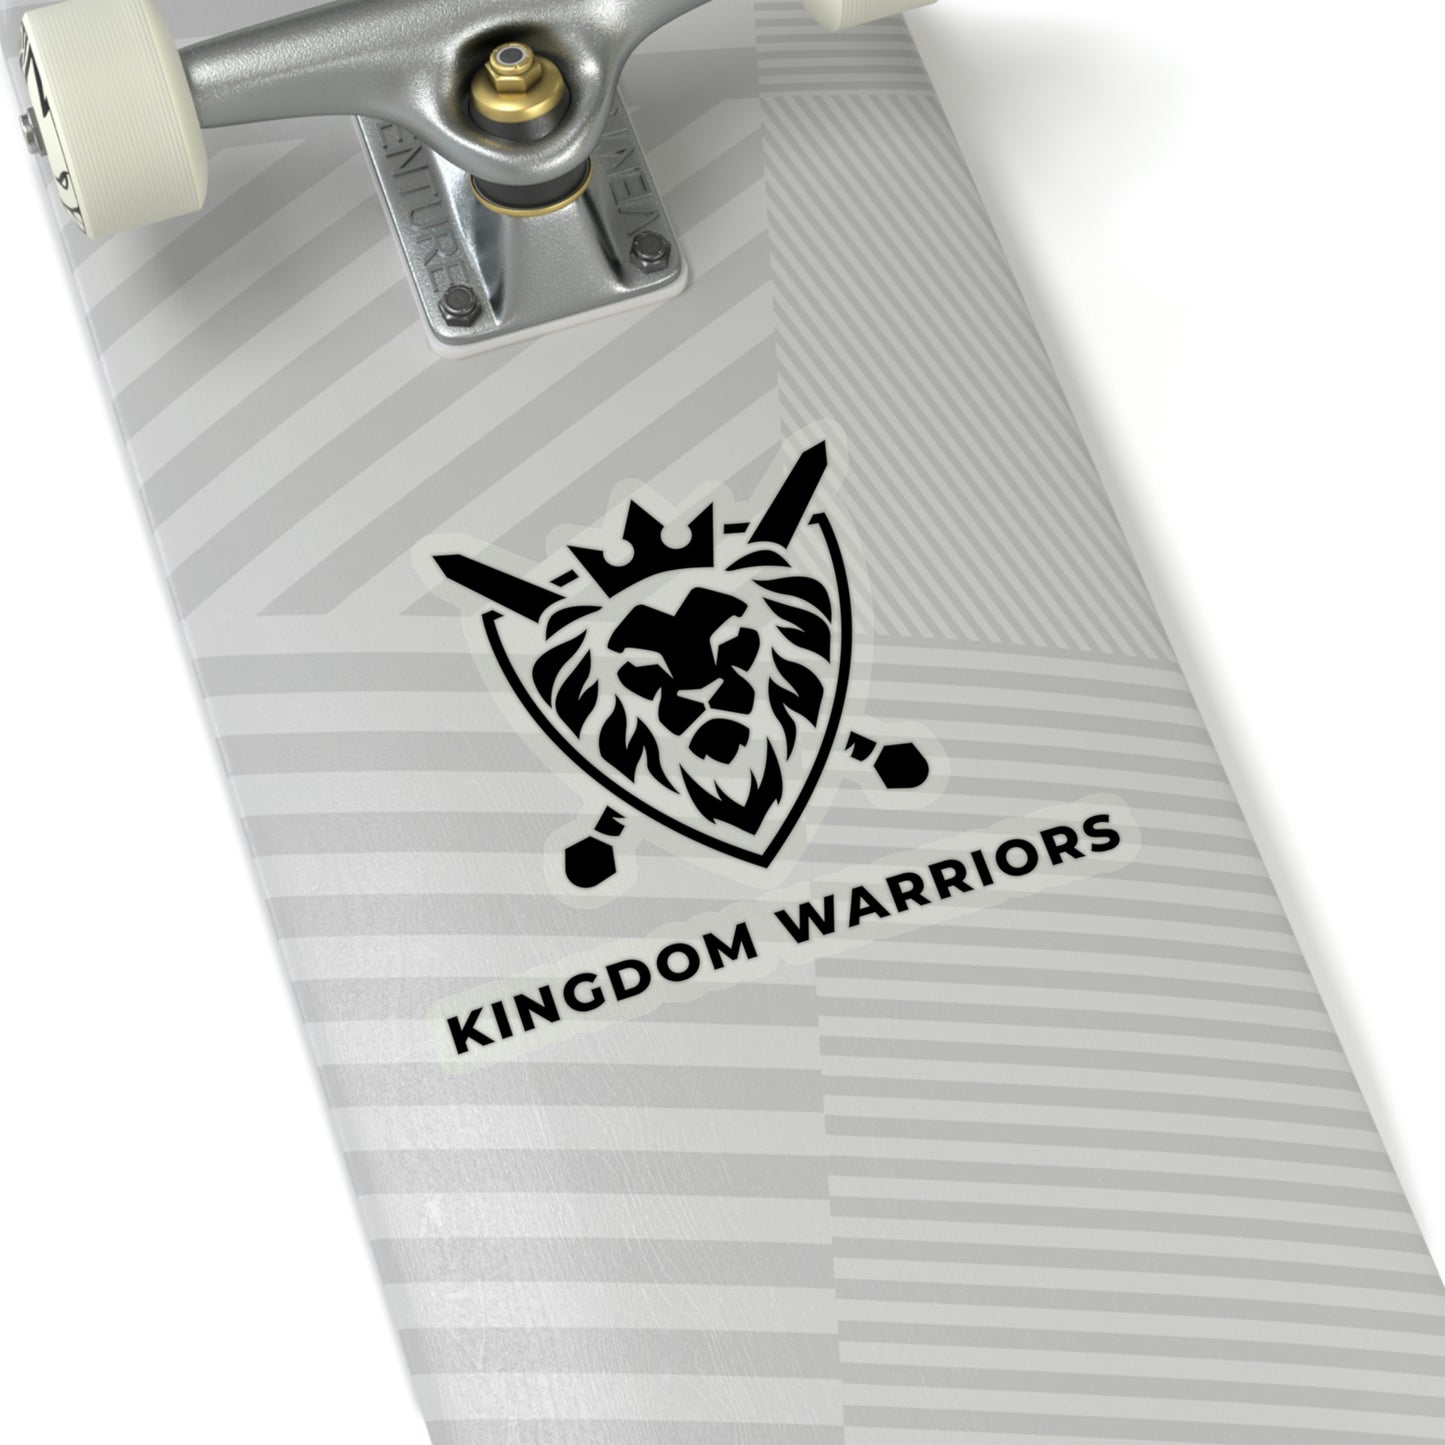 Join the Movement: Kingdom Warriors Stickers